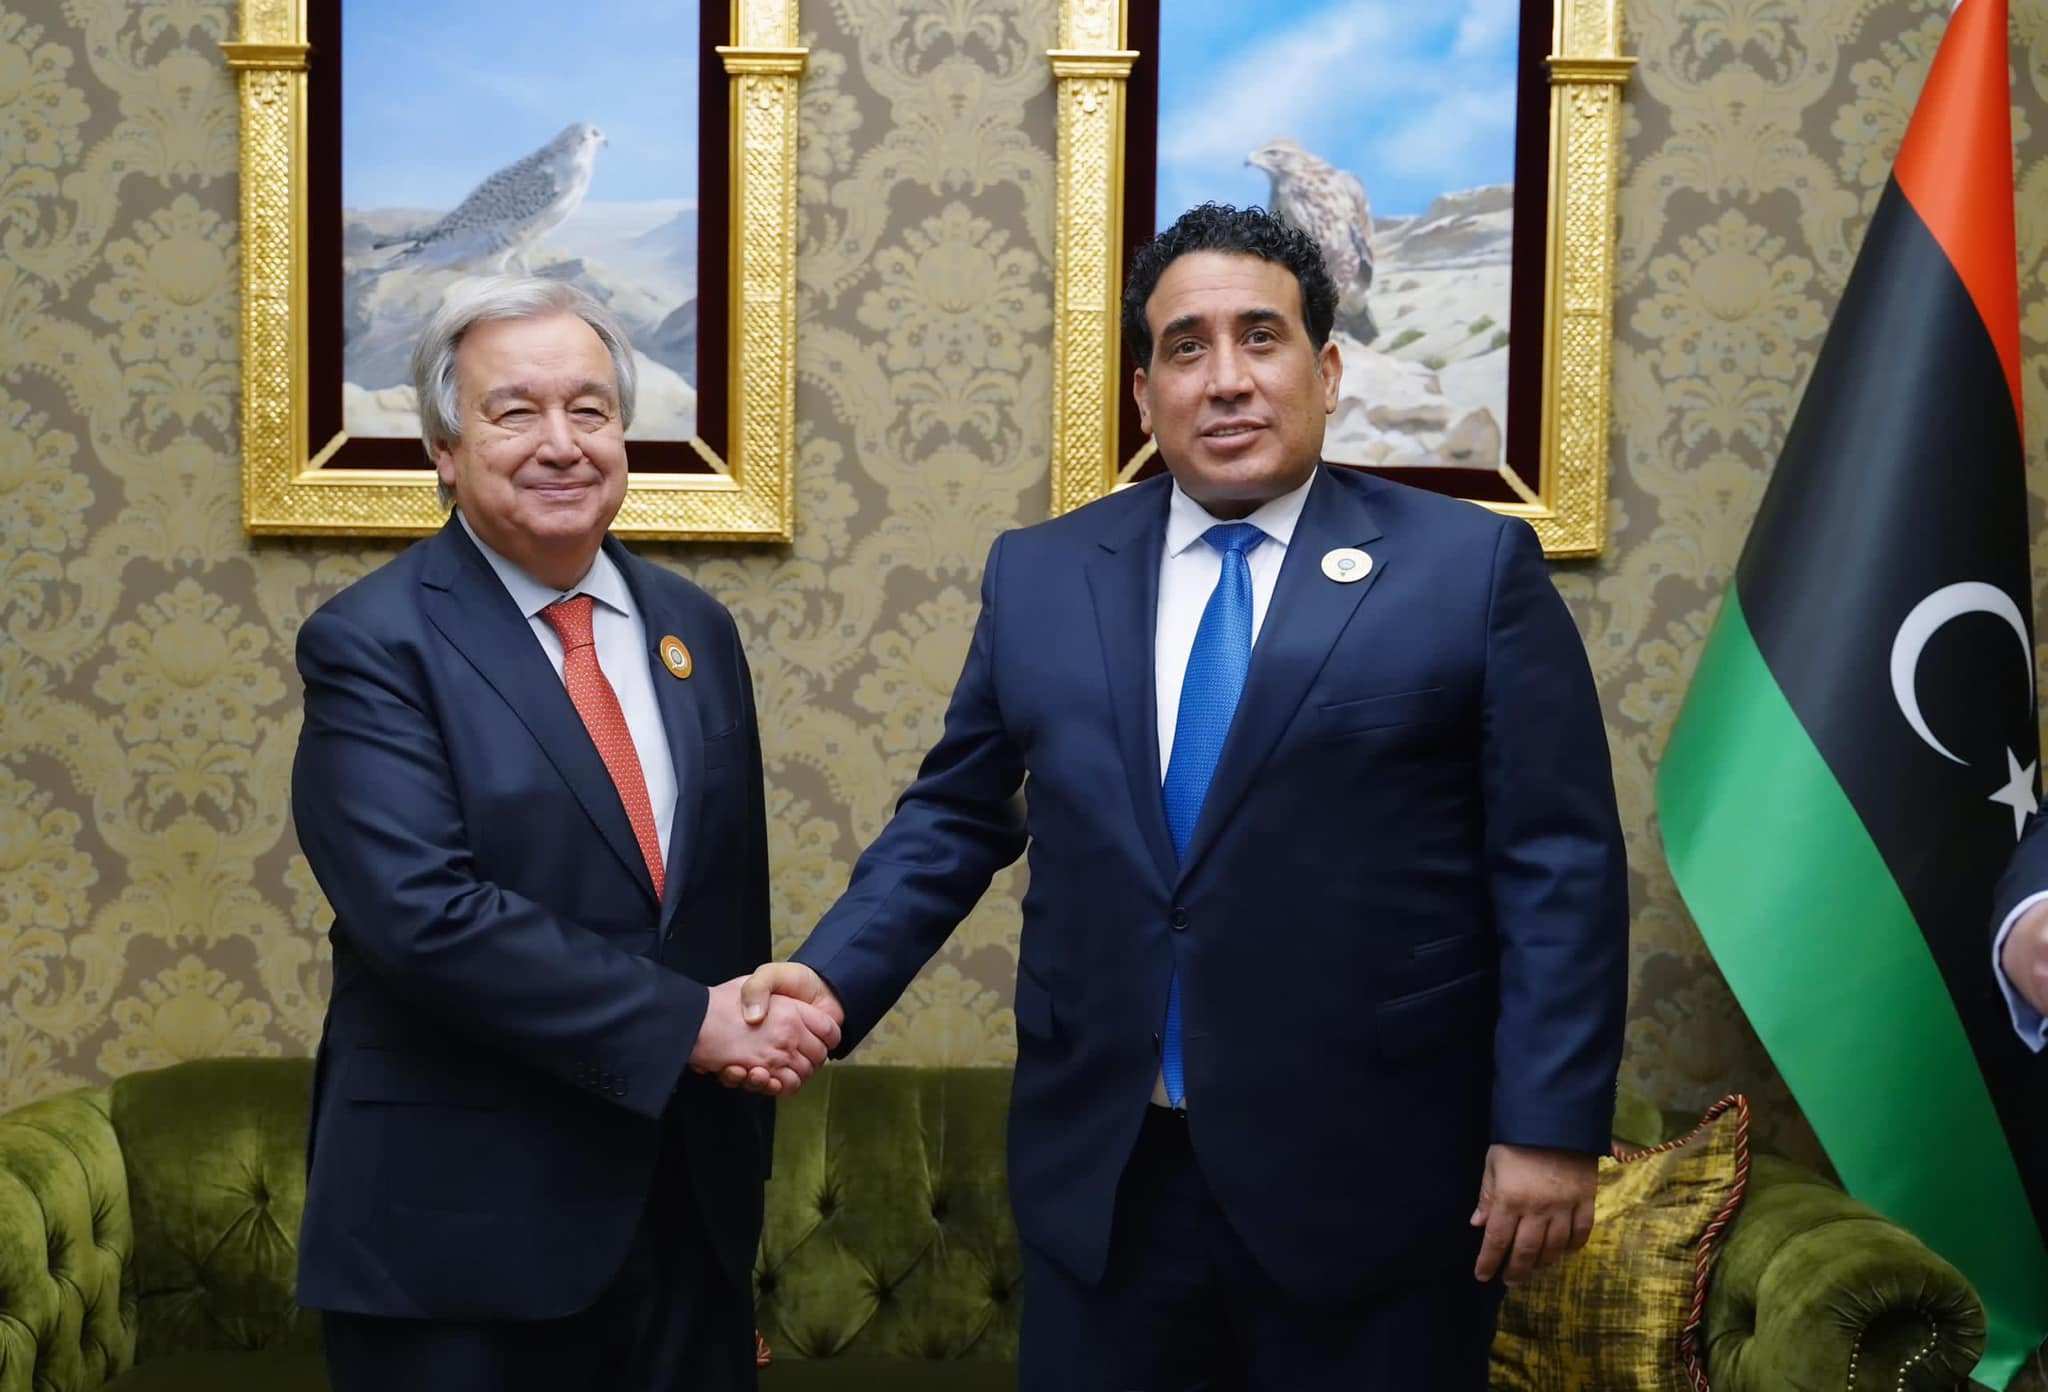 Mnifi meets with the Secretary-General of the United Nations, Antonio Guterres.